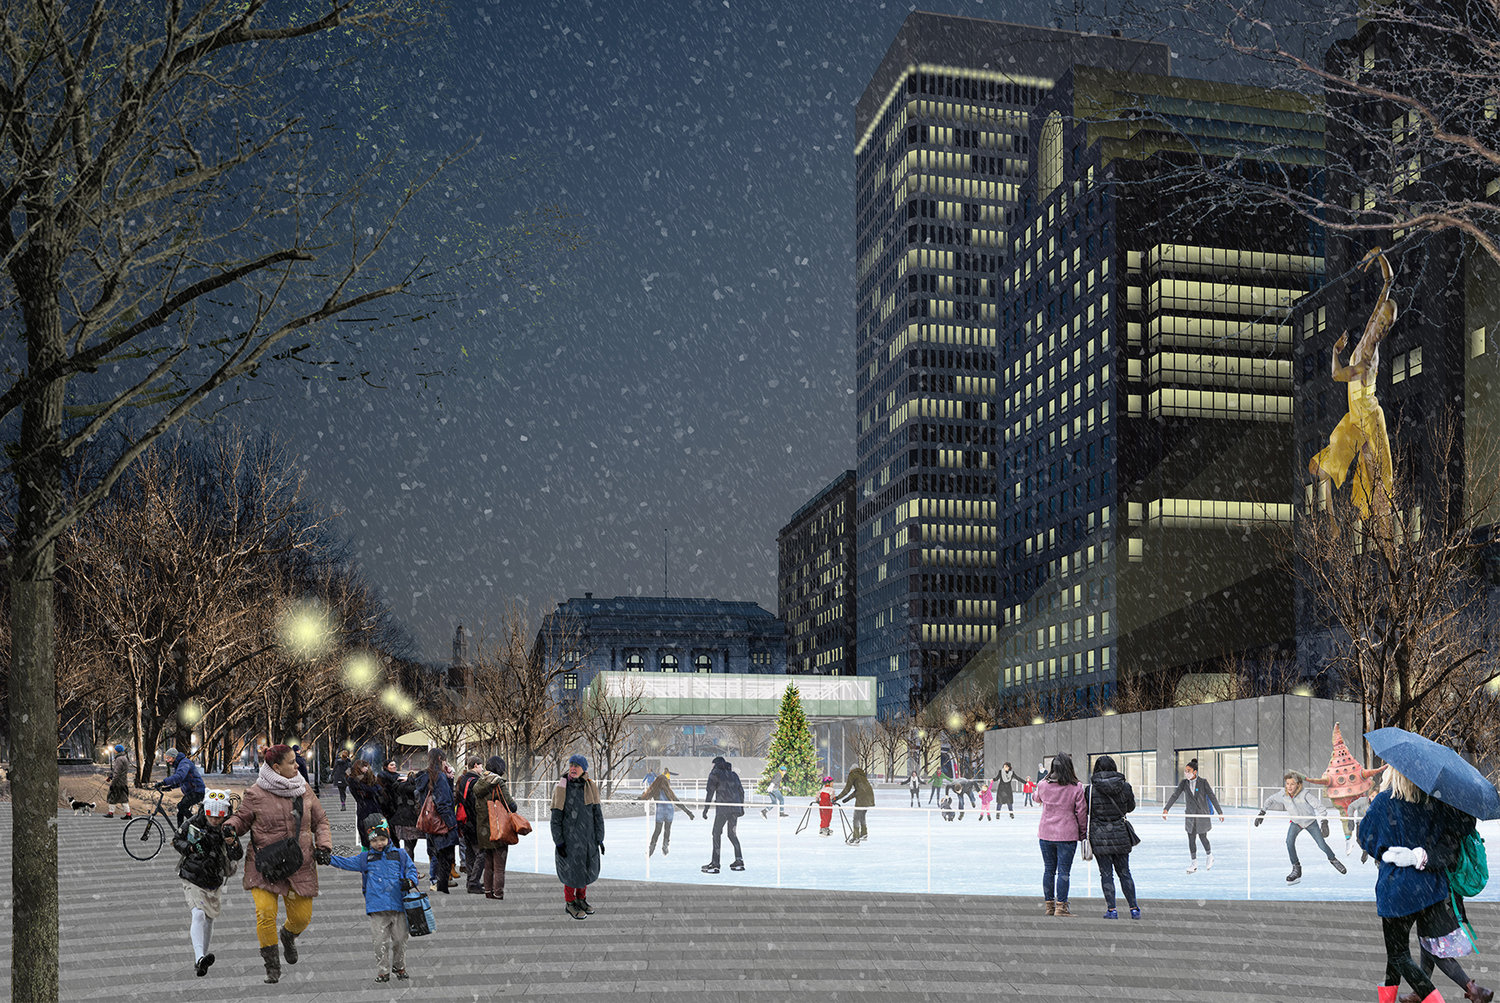 year-round activities will make the new kennedy plaza a destination